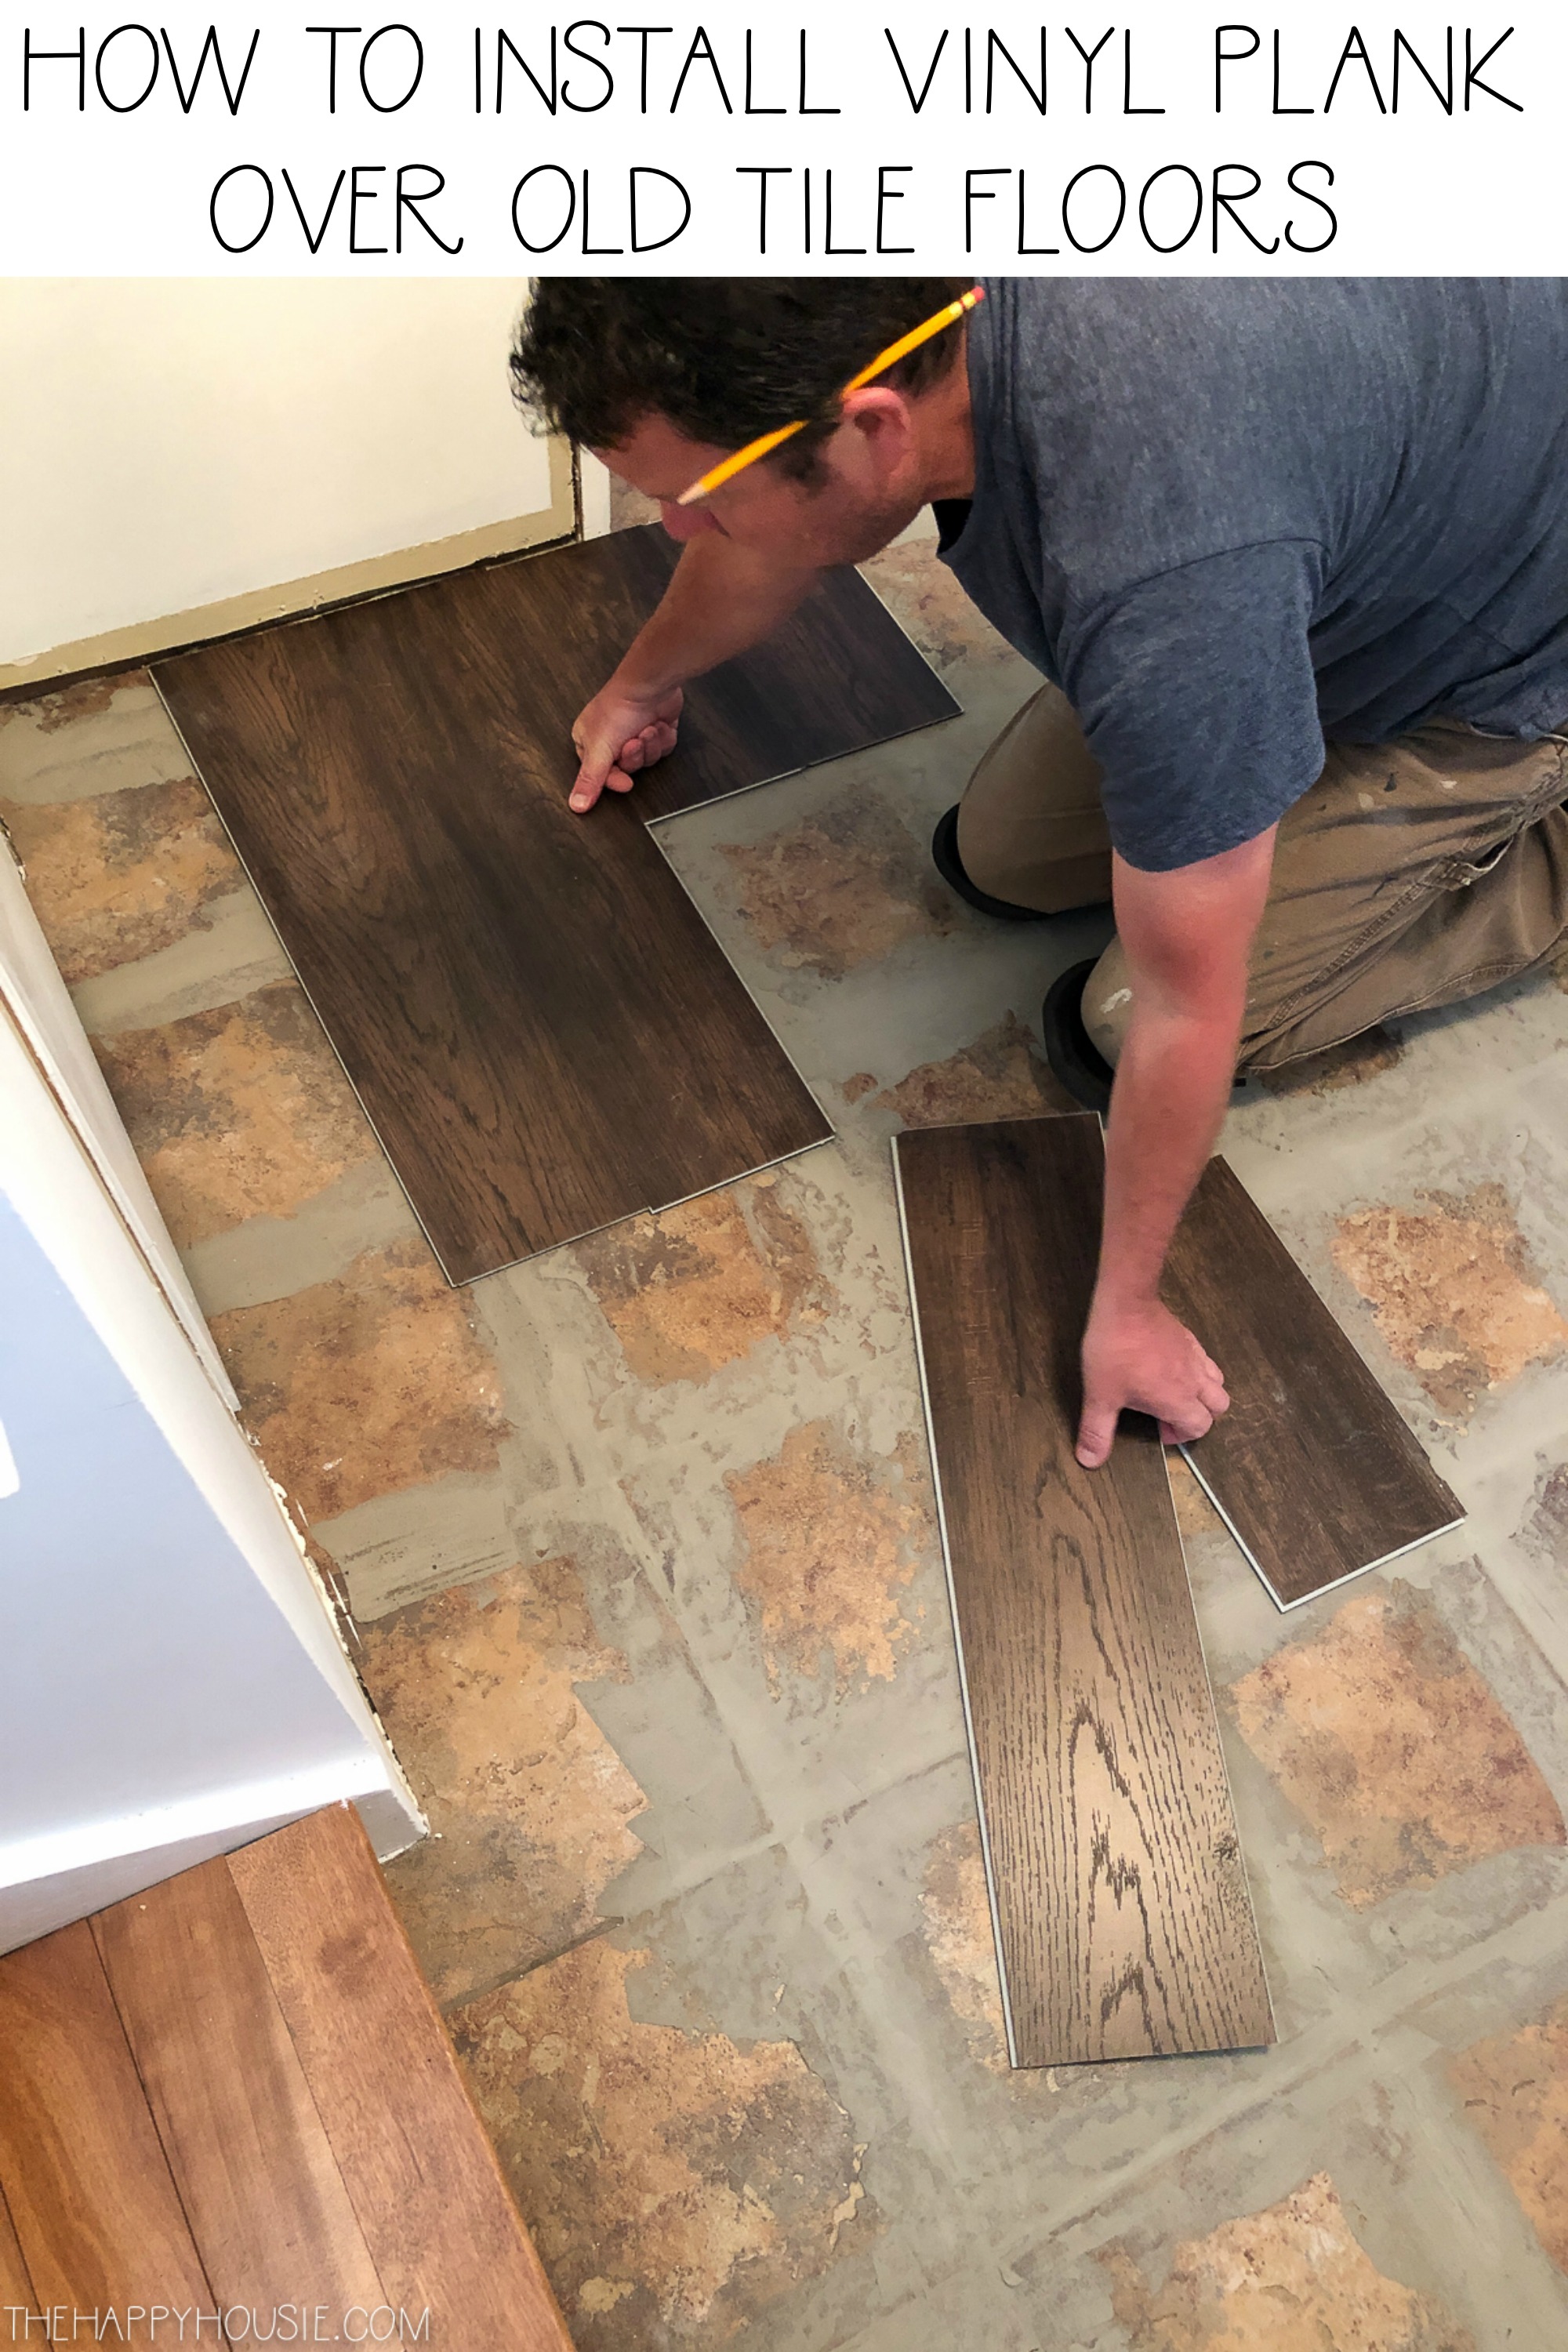 Install Vinyl Plank Over Tile Floors, Patching Compound For Vinyl Flooring